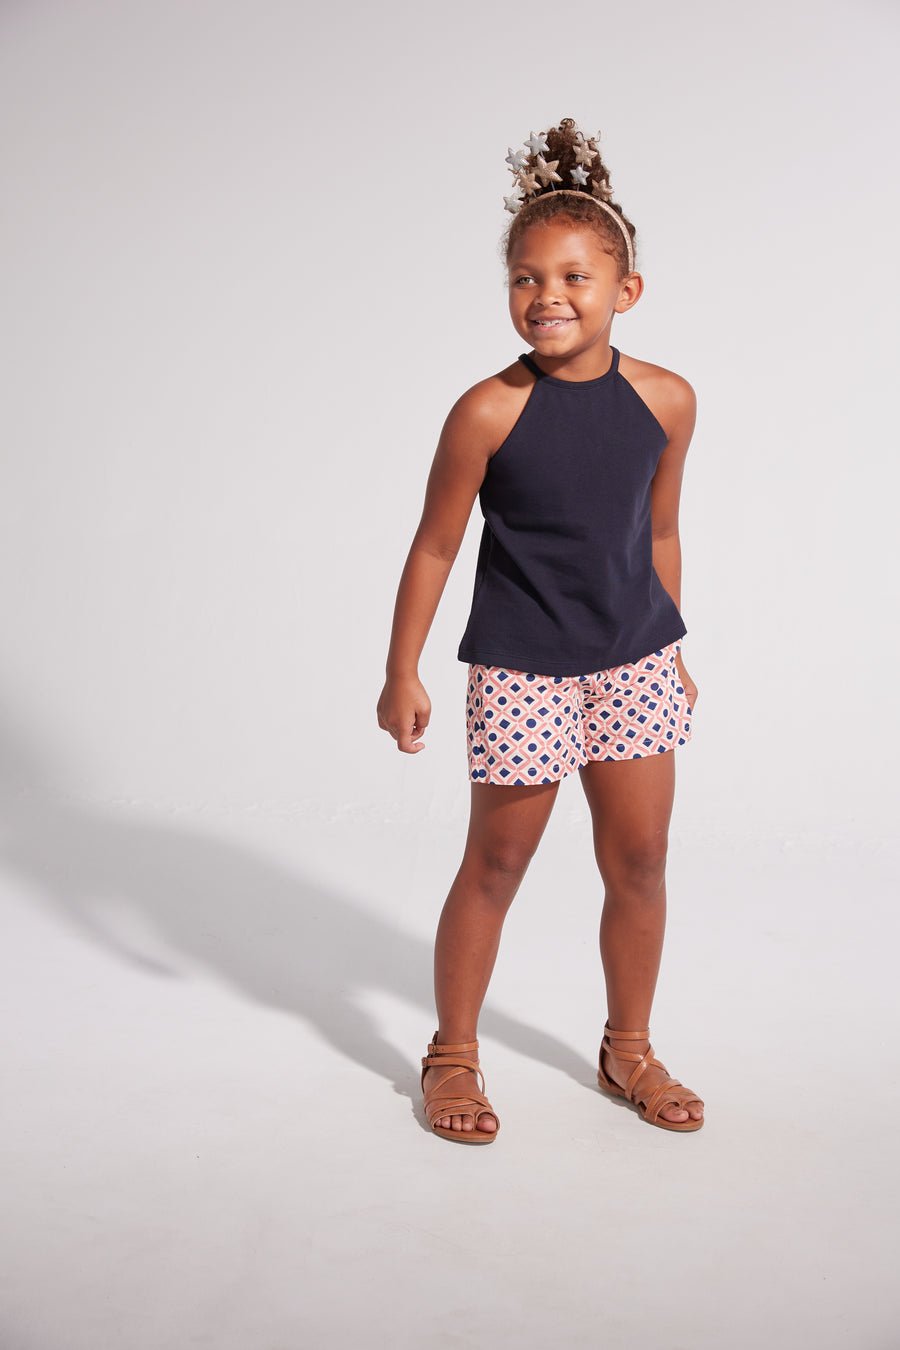 tween girls shorts with navy and rose geometric patterns